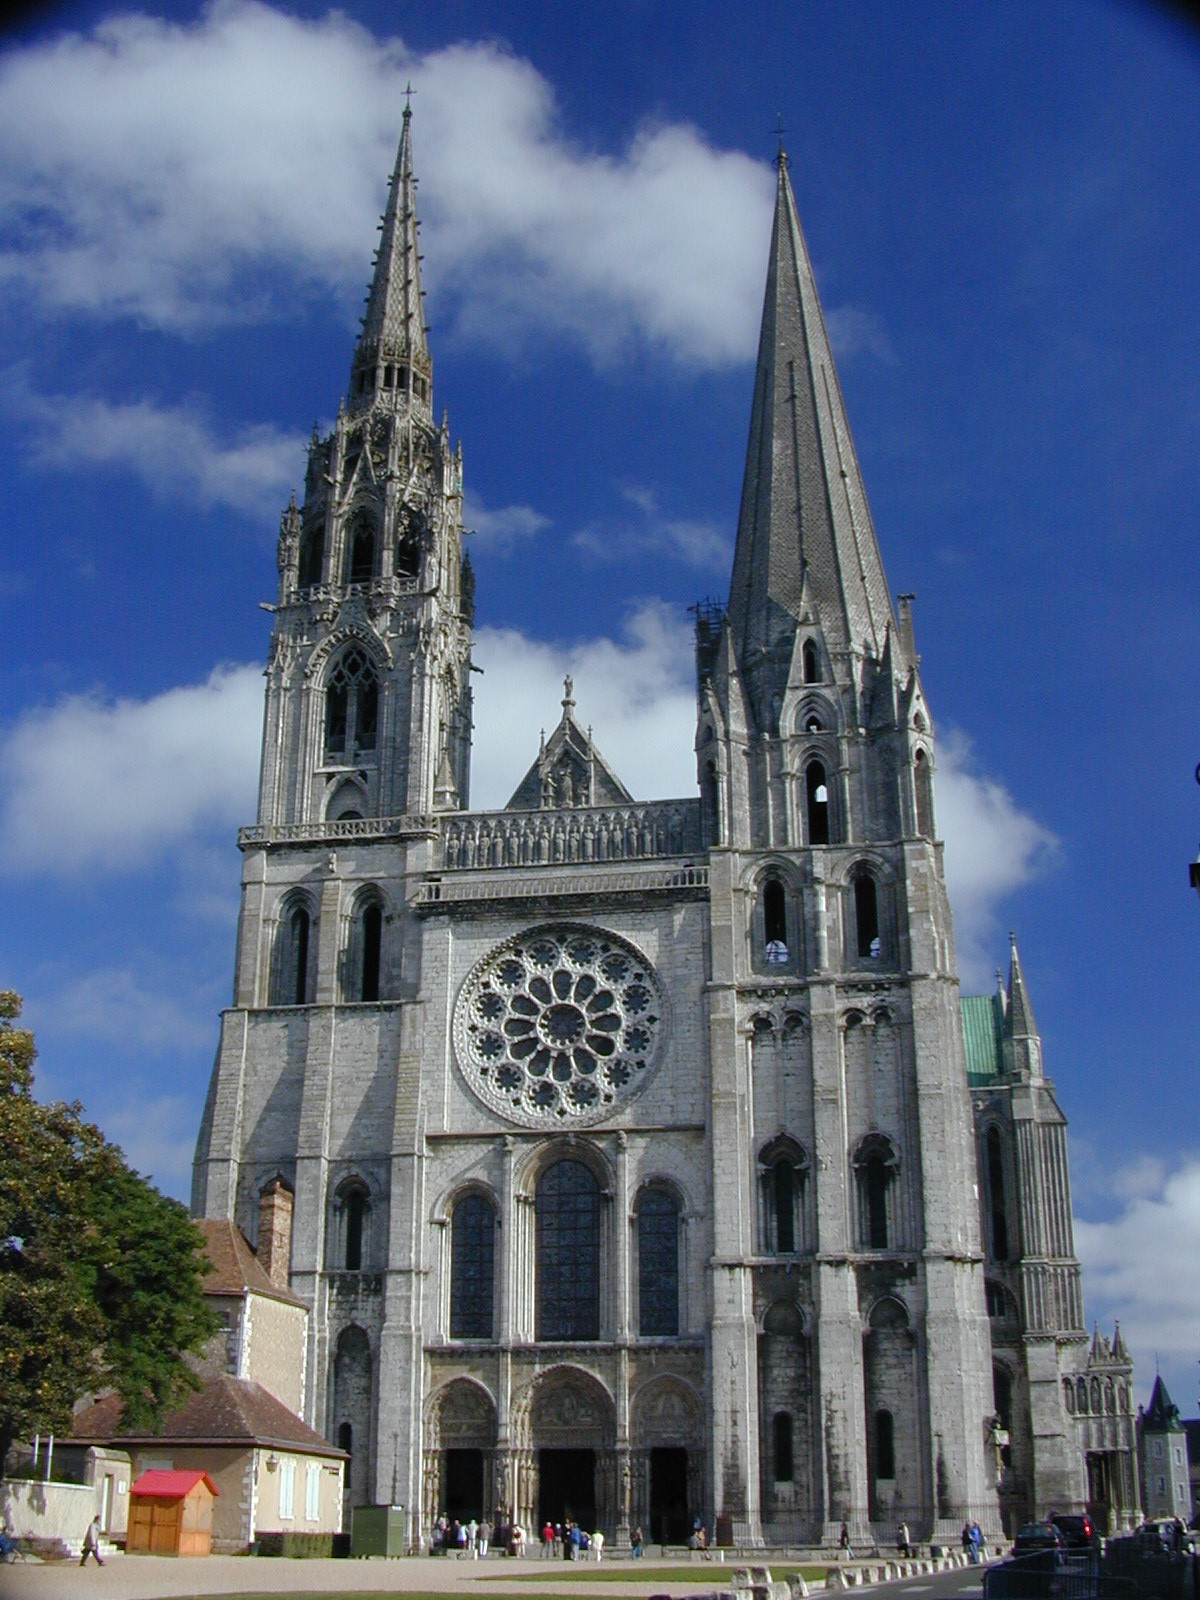 <p><strong>Chartes Cathedral</strong></p><p>Gothic Europe</p><p>Chartres, France</p><p><u>Original</u>: 1145-1155 CE <u>Reconstructed</u>: 1194-1220 CE</p><p>Limestone, stained glass</p>